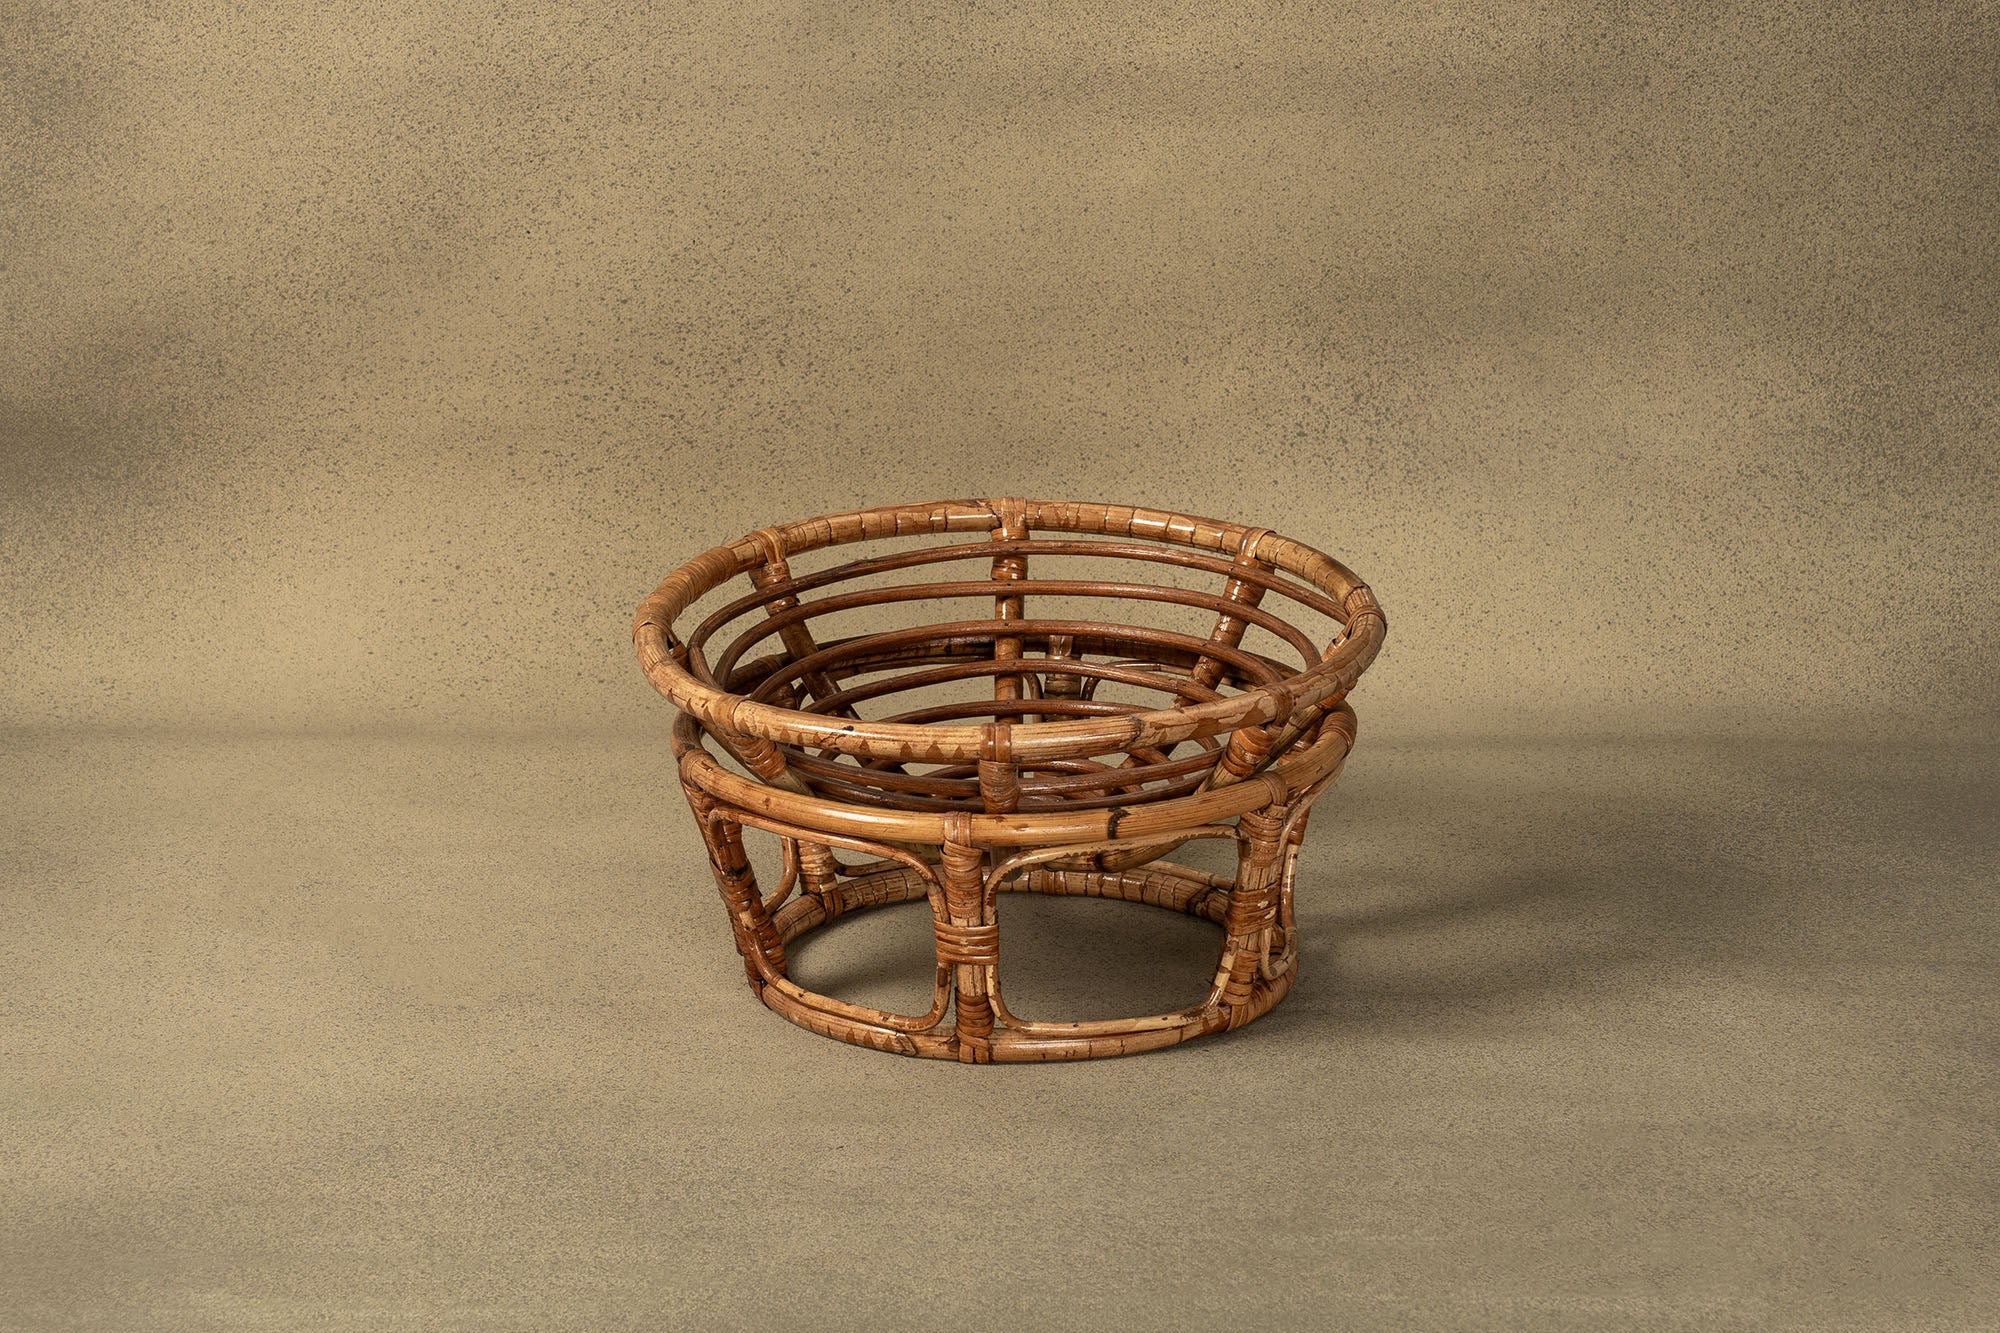 Kate Bamboo Woven Round Double Layer Basket Newborn Props